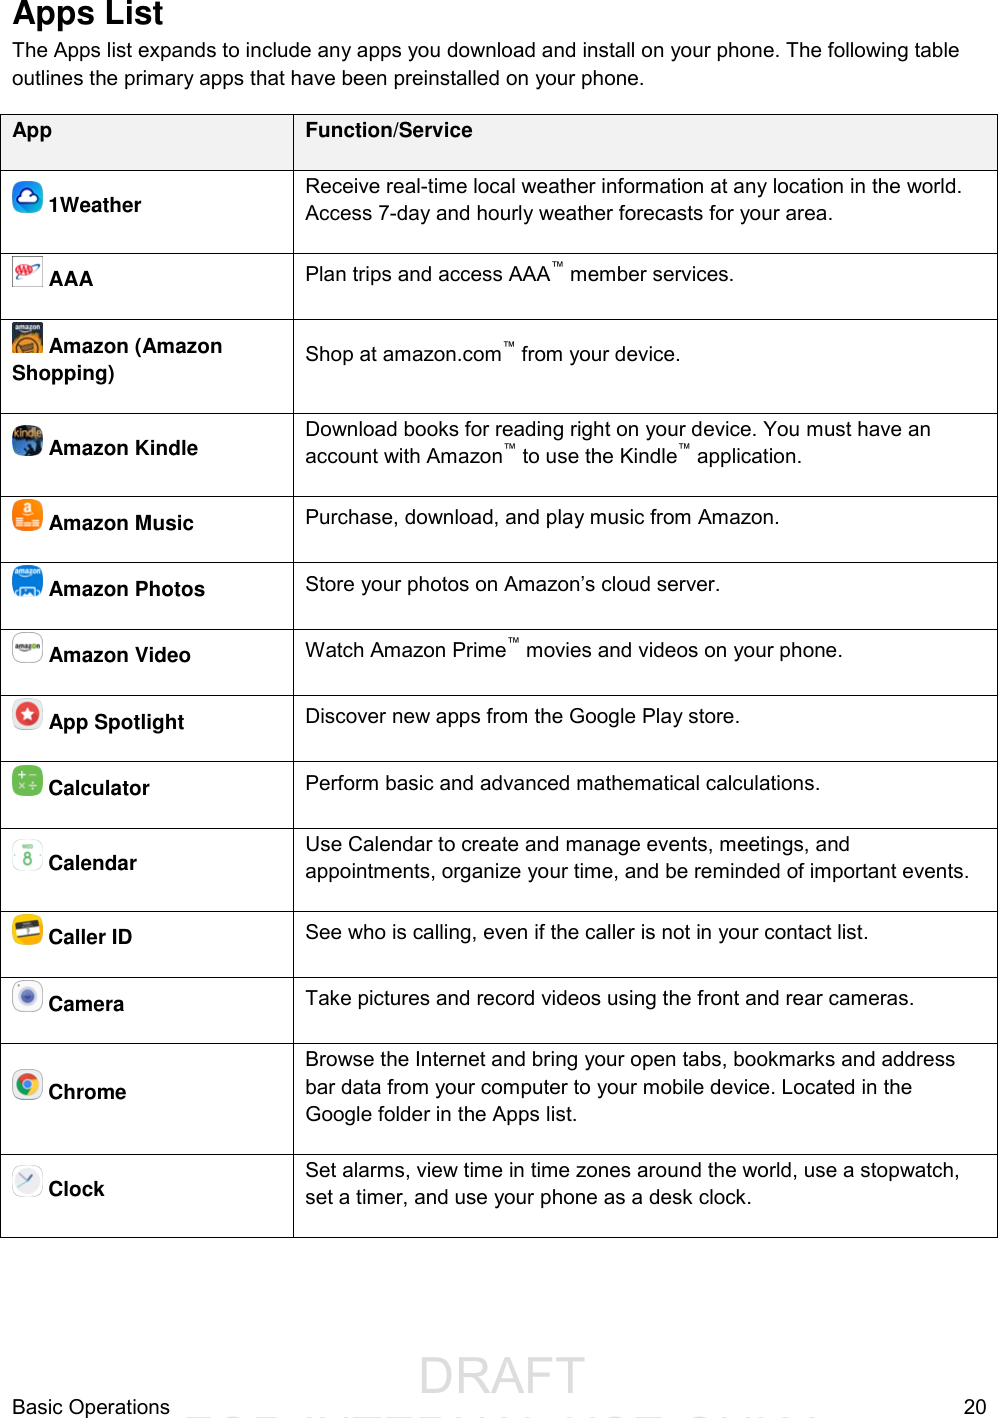                  DRAFT FOR INTERNAL USE ONLYBasic Operations  20 Apps List  The Apps list expands to include any apps you download and install on your phone. The following table outlines the primary apps that have been preinstalled on your phone. App Function/Service  1Weather Receive real-time local weather information at any location in the world. Access 7-day and hourly weather forecasts for your area.  AAA Plan trips and access AAA™ member services.  Amazon (Amazon Shopping) Shop at amazon.com™ from your device.  Amazon Kindle Download books for reading right on your device. You must have an account with Amazon™ to use the Kindle™ application.   Amazon Music Purchase, download, and play music from Amazon.   Amazon Photos Store your photos on Amazon’s cloud server.   Amazon Video Watch Amazon Prime™ movies and videos on your phone.   App Spotlight Discover new apps from the Google Play store.  Calculator Perform basic and advanced mathematical calculations.  Calendar Use Calendar to create and manage events, meetings, and appointments, organize your time, and be reminded of important events.  Caller ID See who is calling, even if the caller is not in your contact list.  Camera  Take pictures and record videos using the front and rear cameras.  Chrome Browse the Internet and bring your open tabs, bookmarks and address bar data from your computer to your mobile device. Located in the Google folder in the Apps list.  Clock Set alarms, view time in time zones around the world, use a stopwatch, set a timer, and use your phone as a desk clock. 